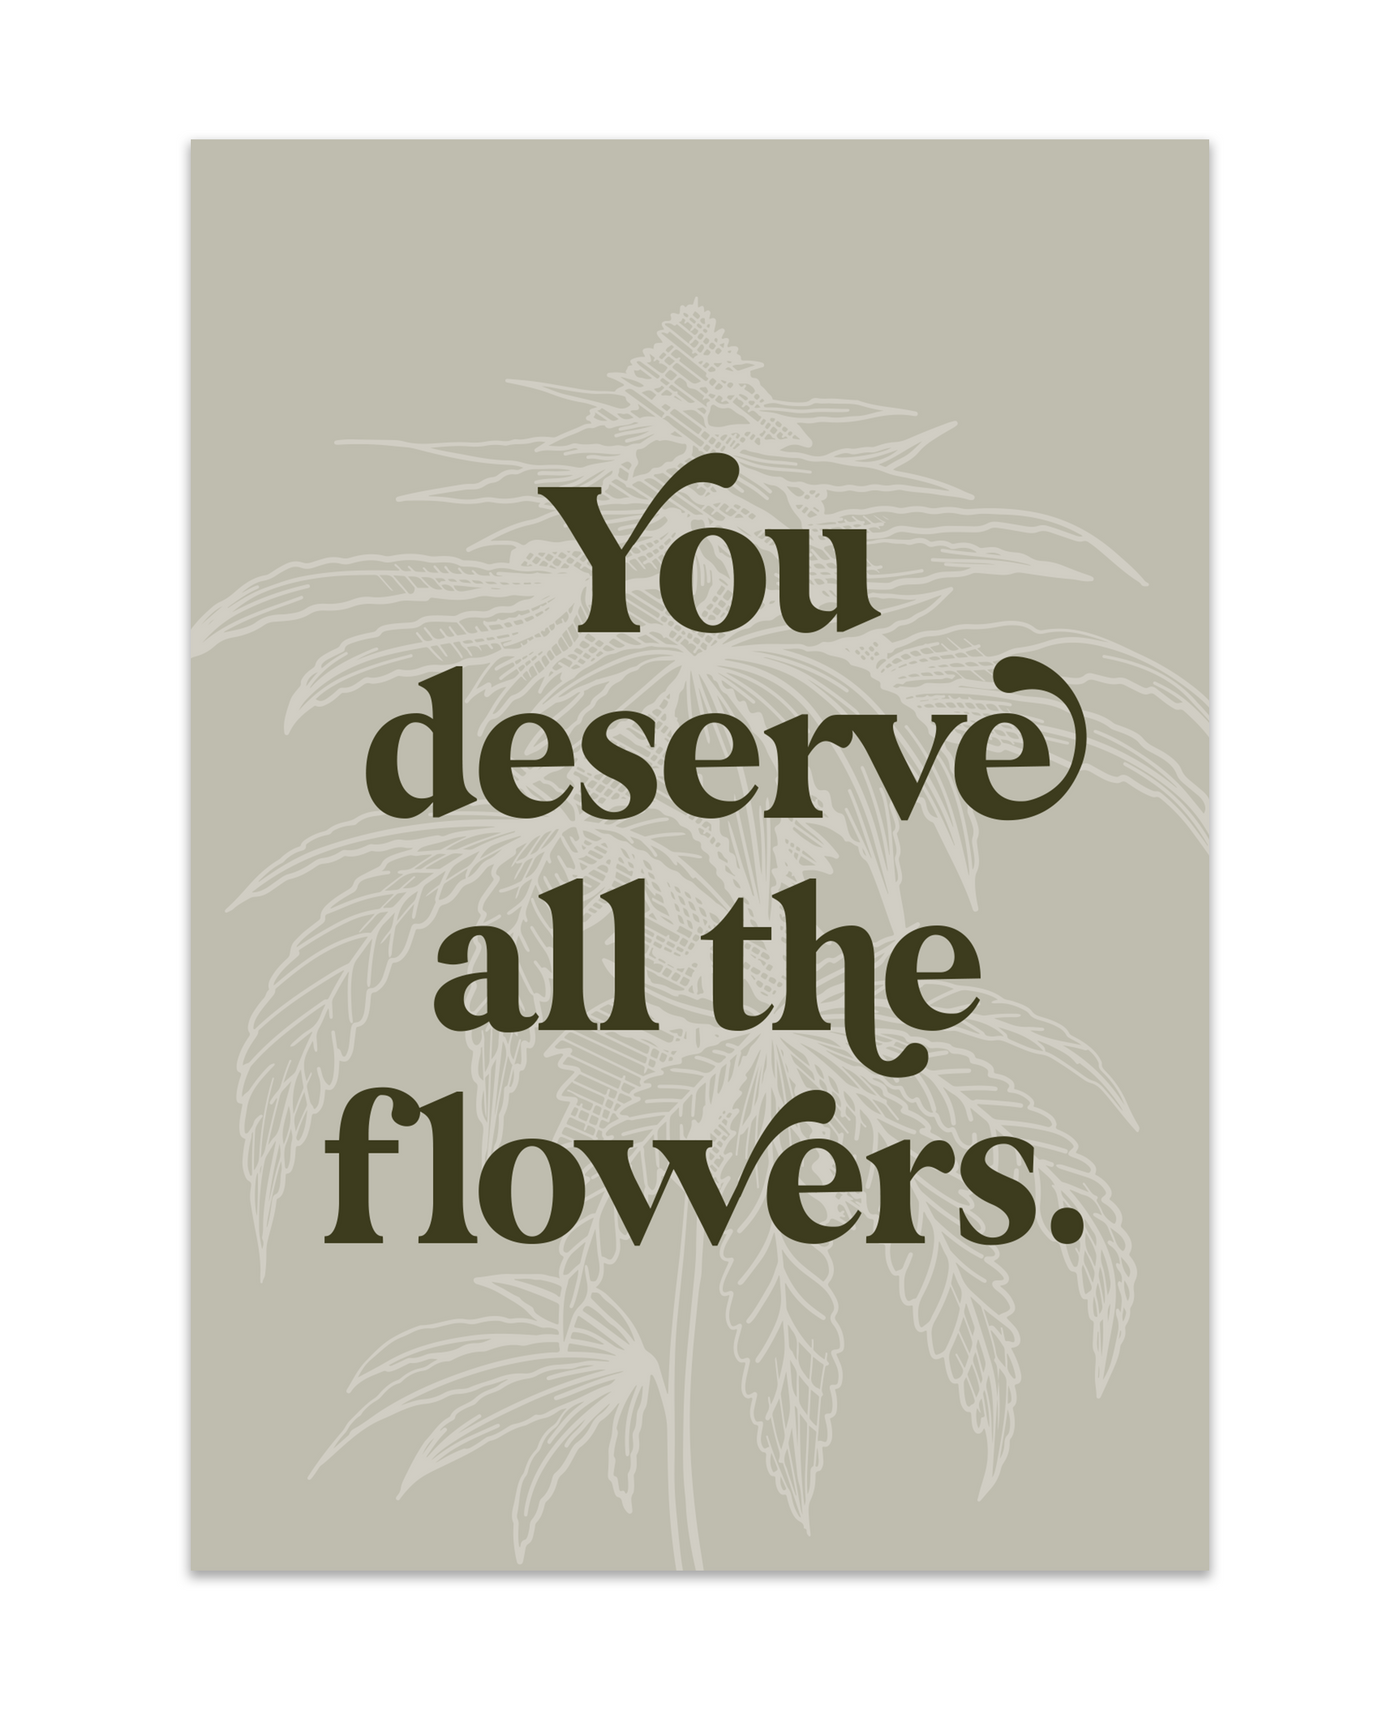 grey colored Deserve flowers greeting card that reads "You deserve all the flowers" with a feint white marijuana plant illustration behind the text.